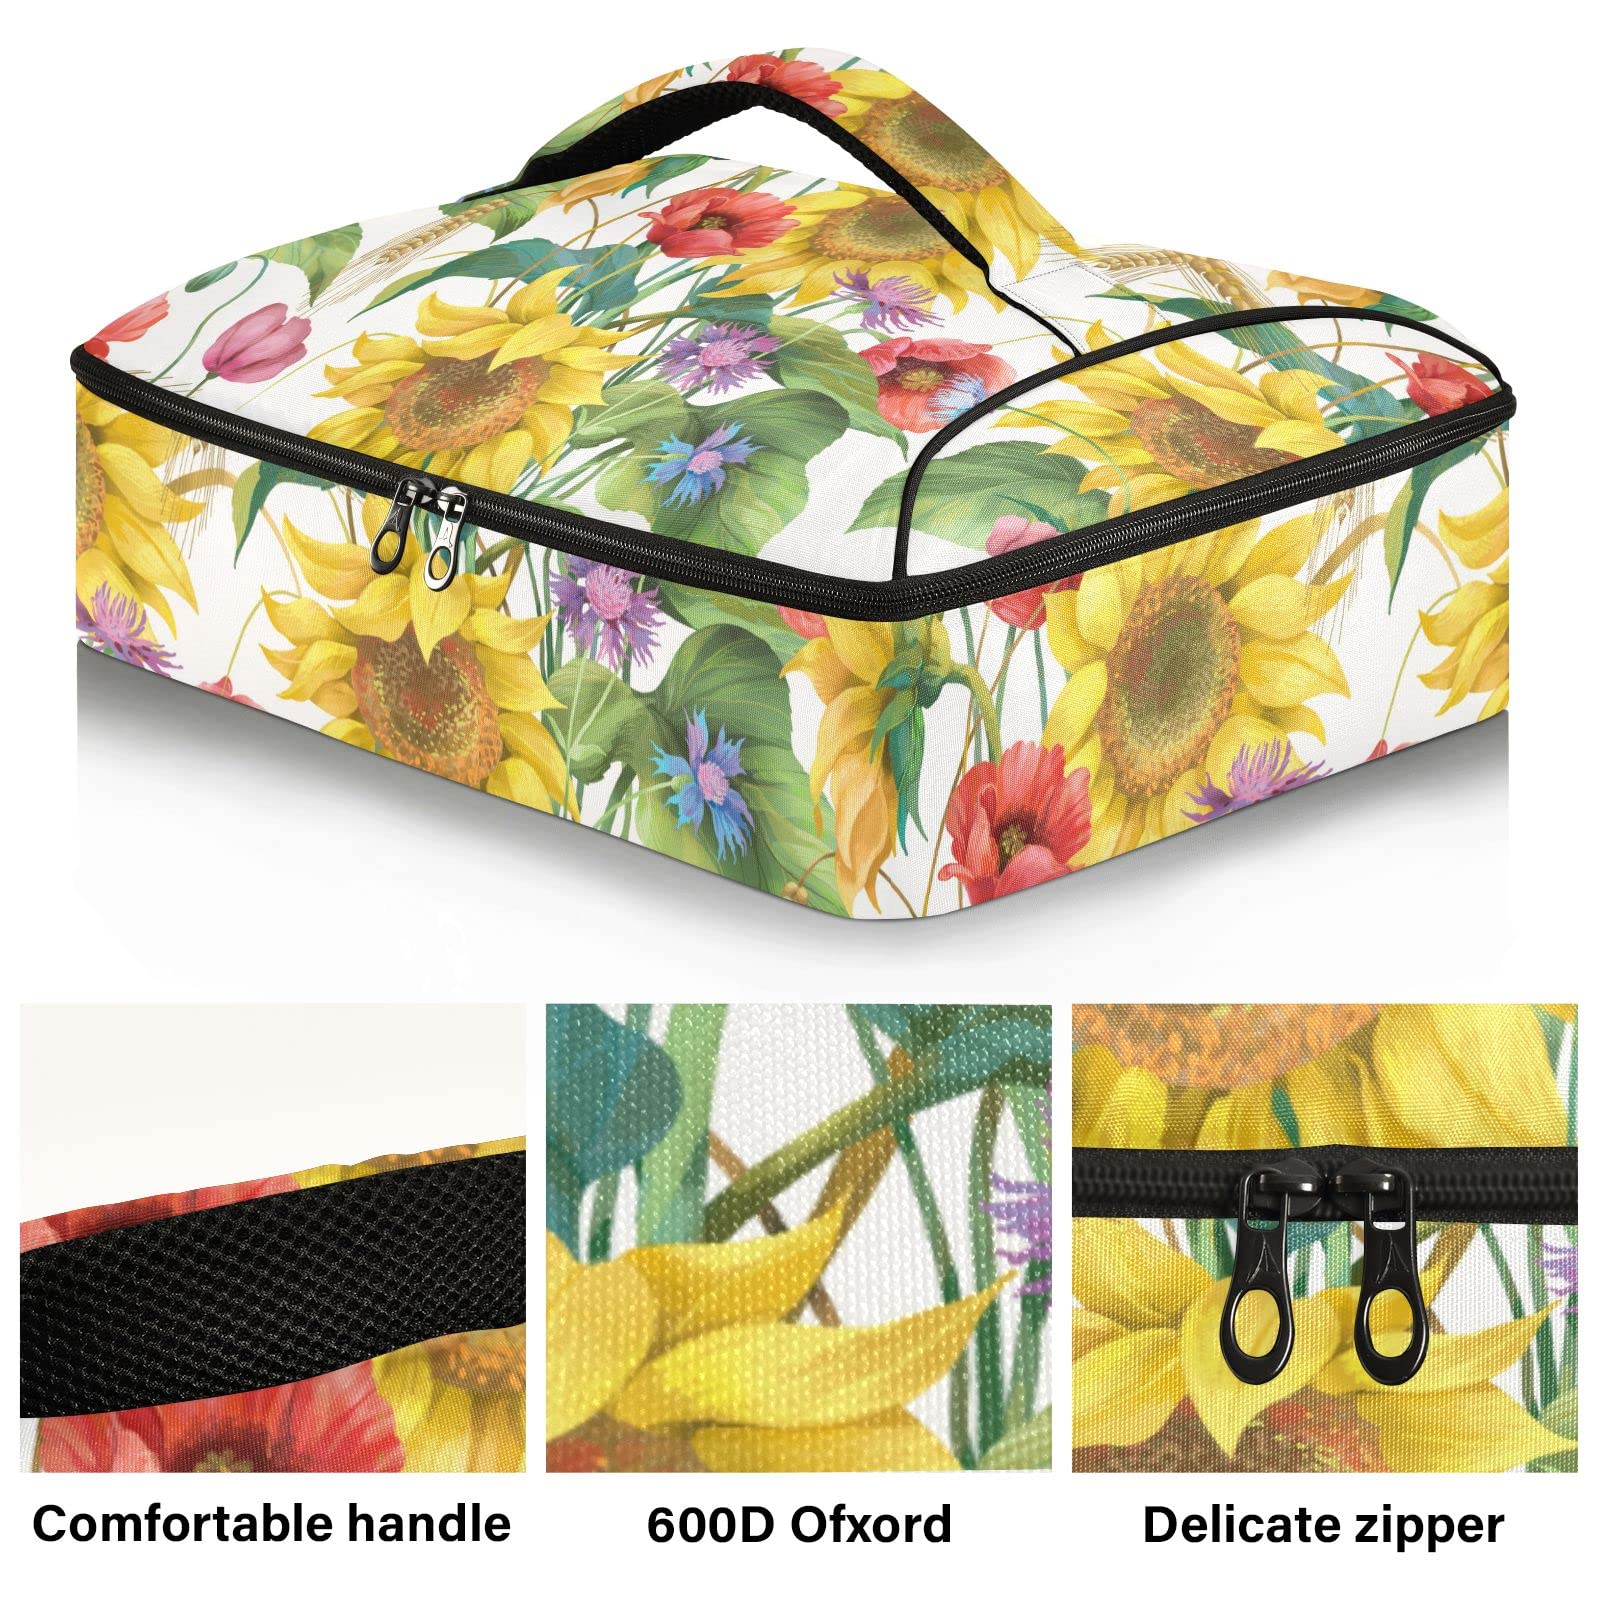 Kigai Sunflower Cornflower Poppy Pattern Insulated Casserole Carriers for Hot or Cold Food Storage, Perfect for Parties, Picnics, and Camping; Fits 9” x 13”Baking Dishes; Casserole Carrying Case